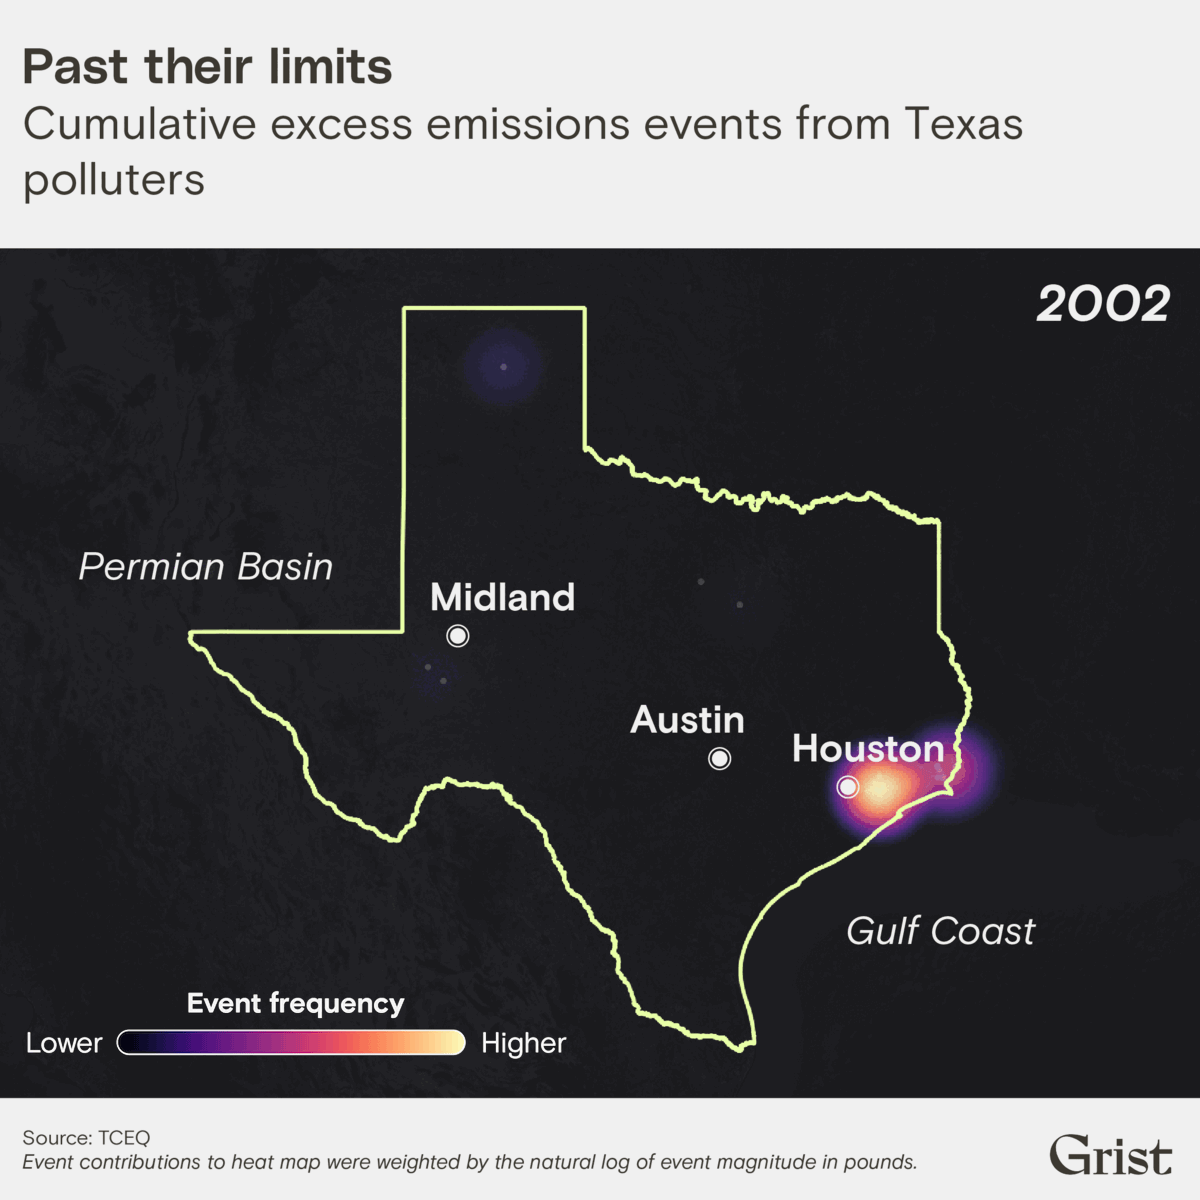 An animated heat map of Texas showing cumulative excess emissions events between 2002 and 2021. The Gulf Coast and the Permian Basin show the highest frequency of events.